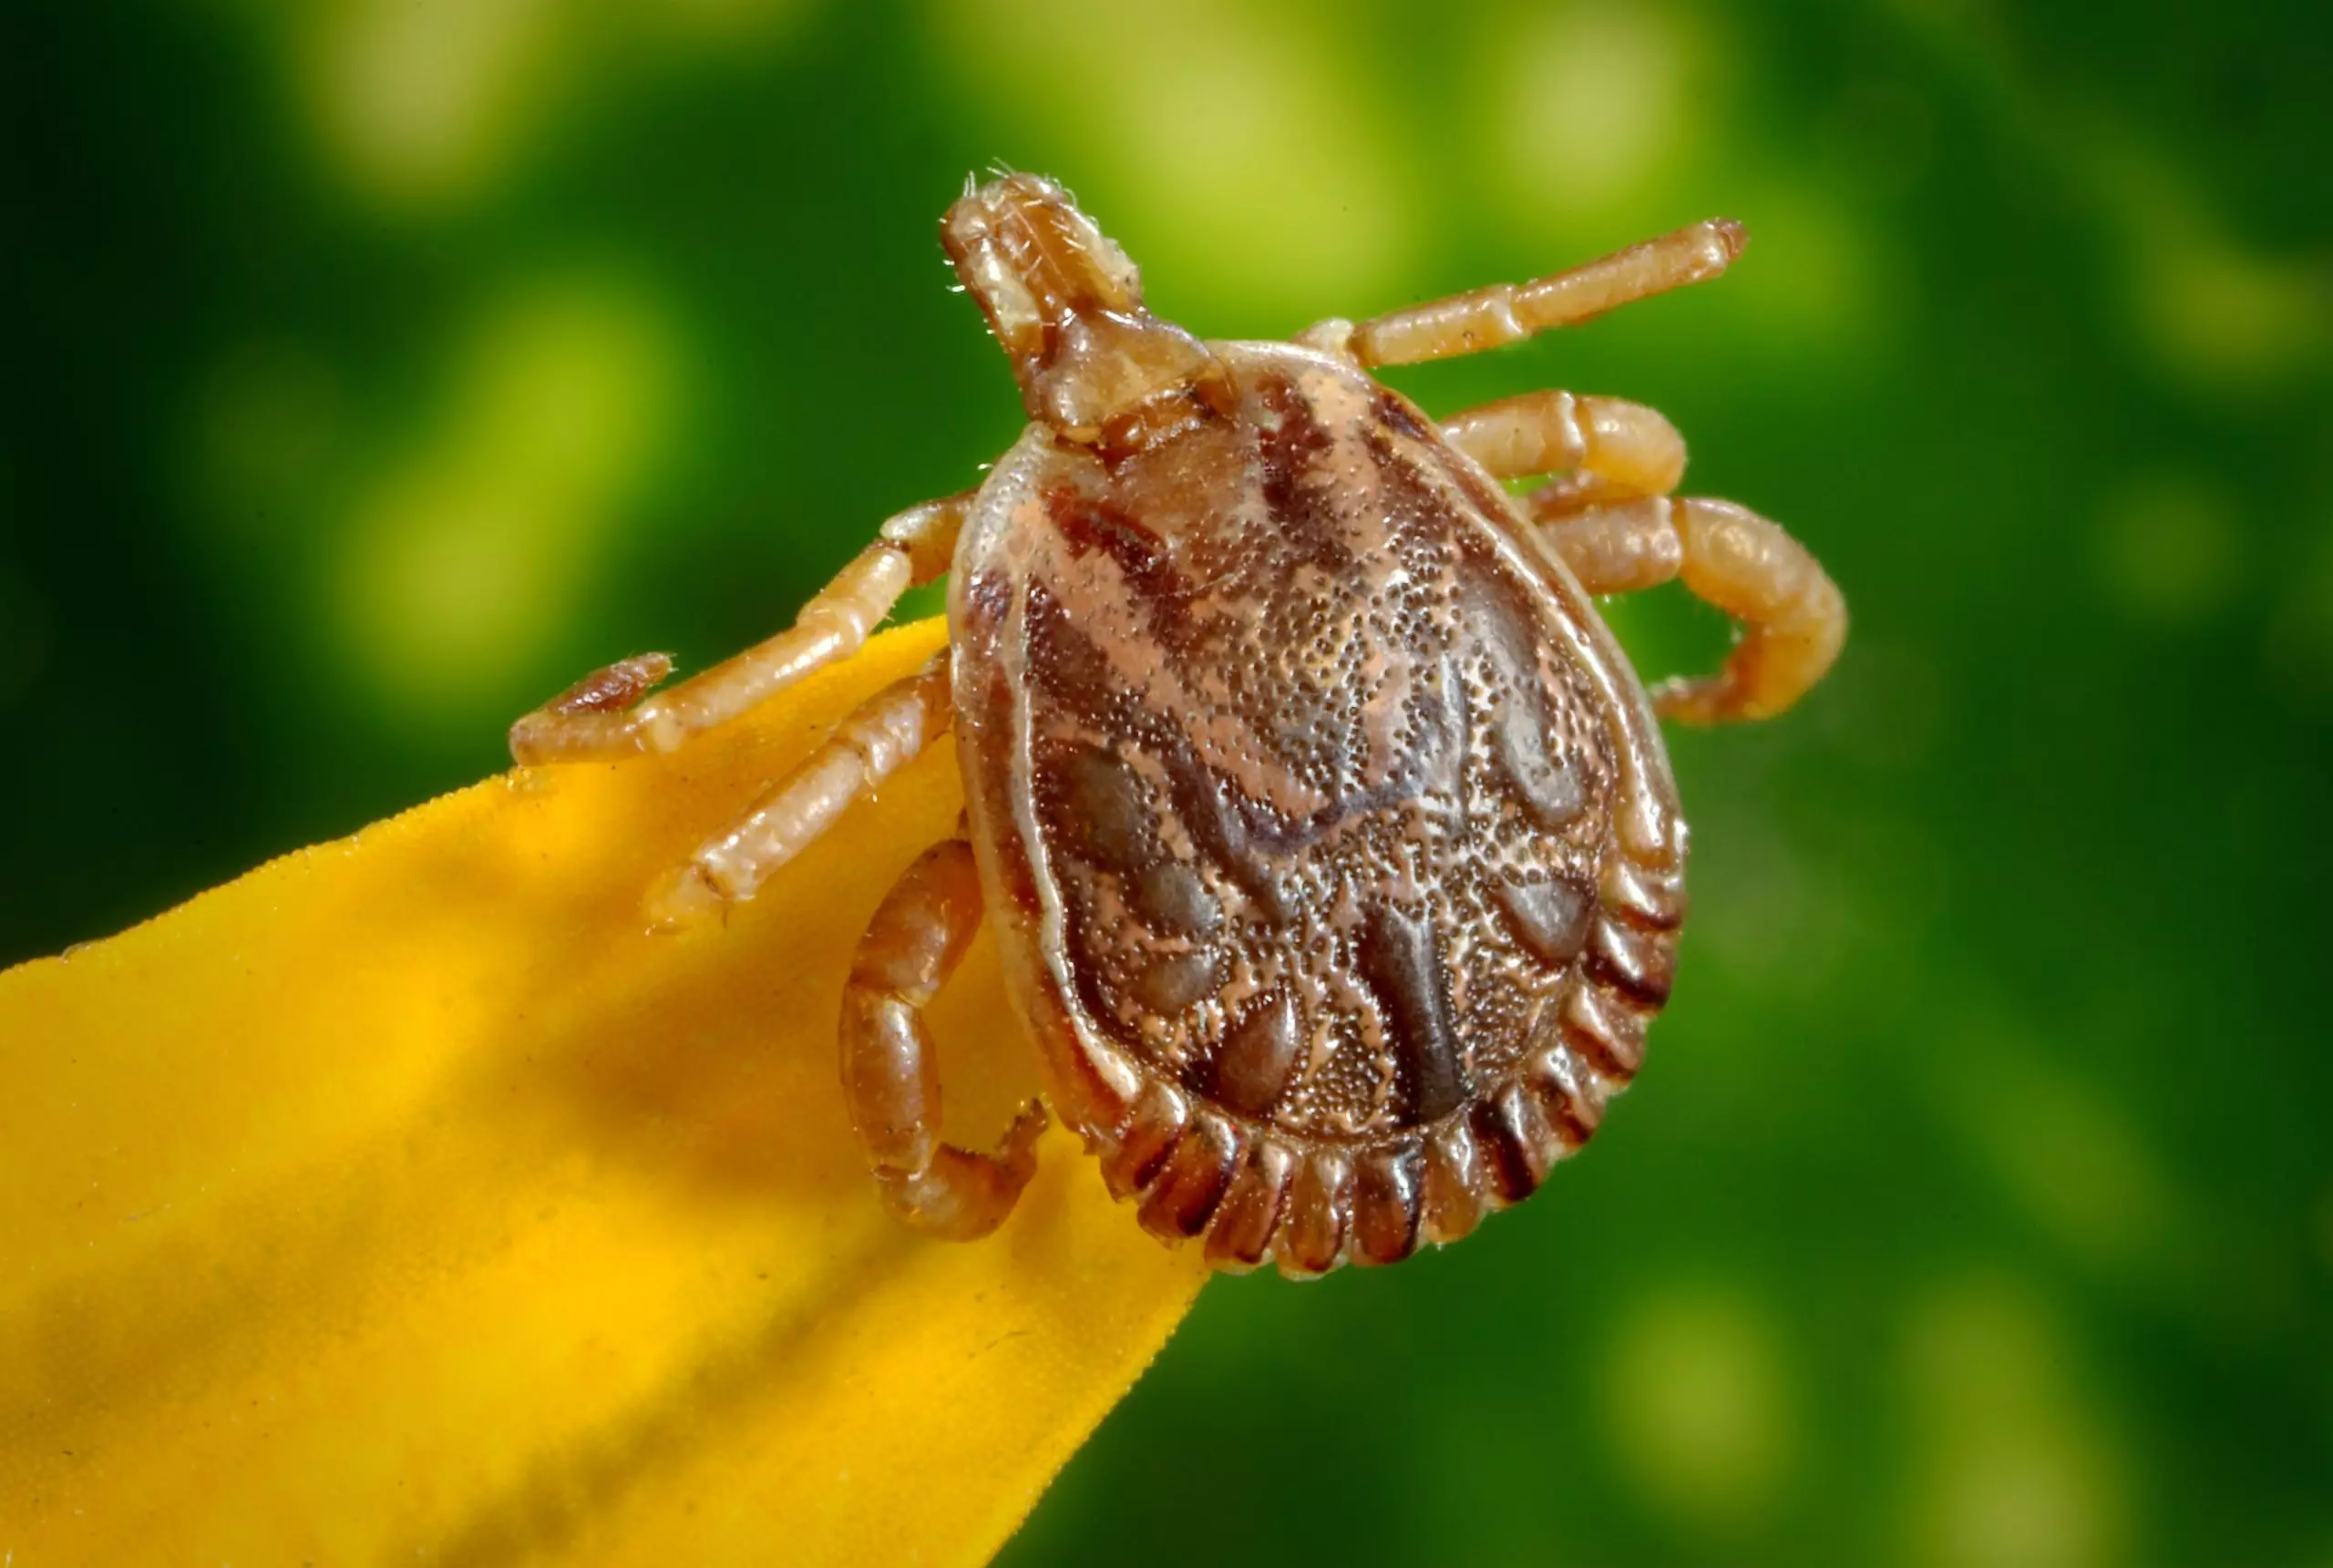 Are medieval times are back? : Bed bug infestations and how to save yourselves